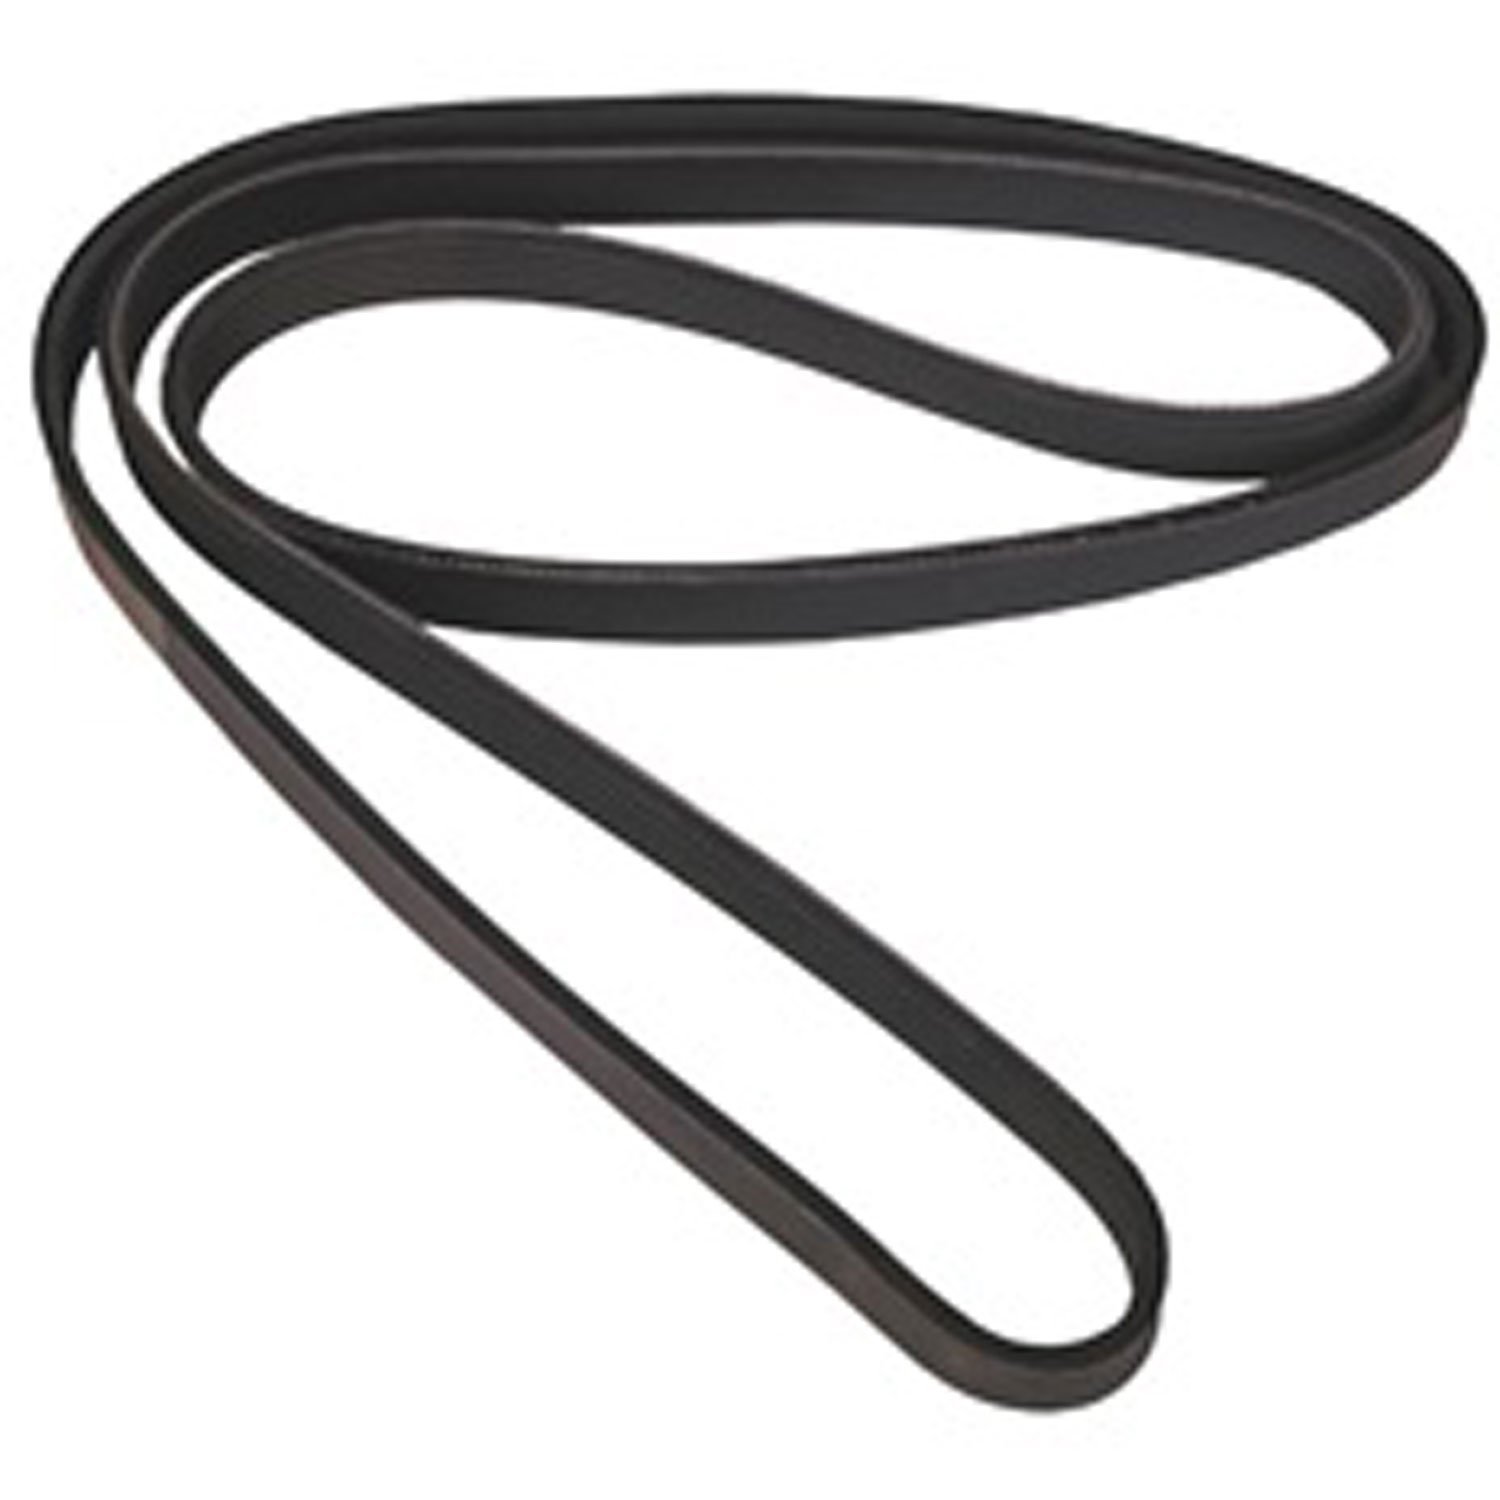 Stock replacement serpentine belt from Omix-ADA, Fits 91-95 Jeep Cherokee XJ with 4.0 liter engine.